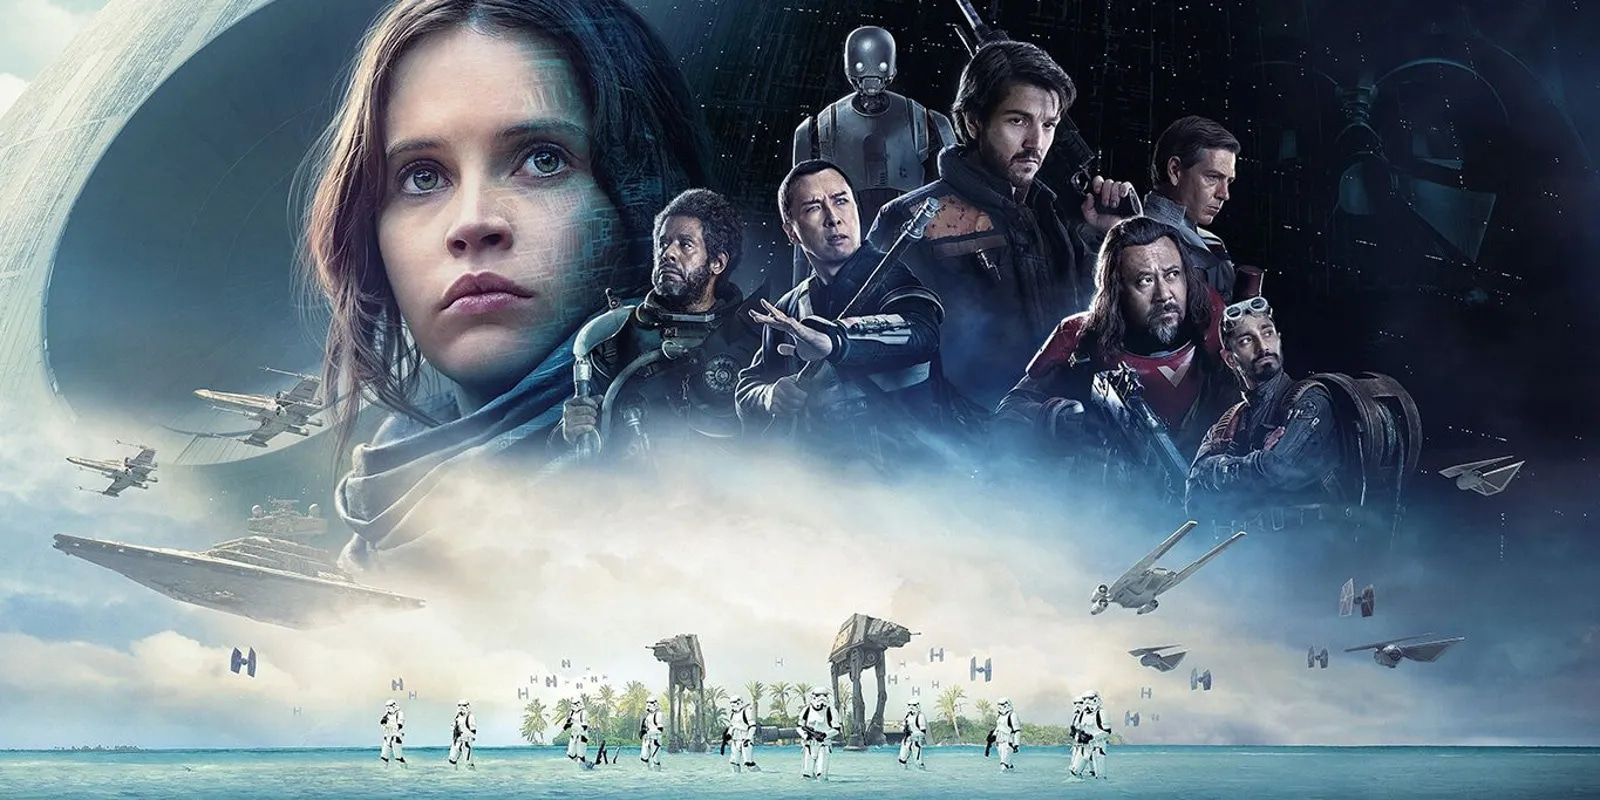 All the major characters of Rogue One appear superimposed over images of the Death Star and of Imperial forces on the planet Scarif